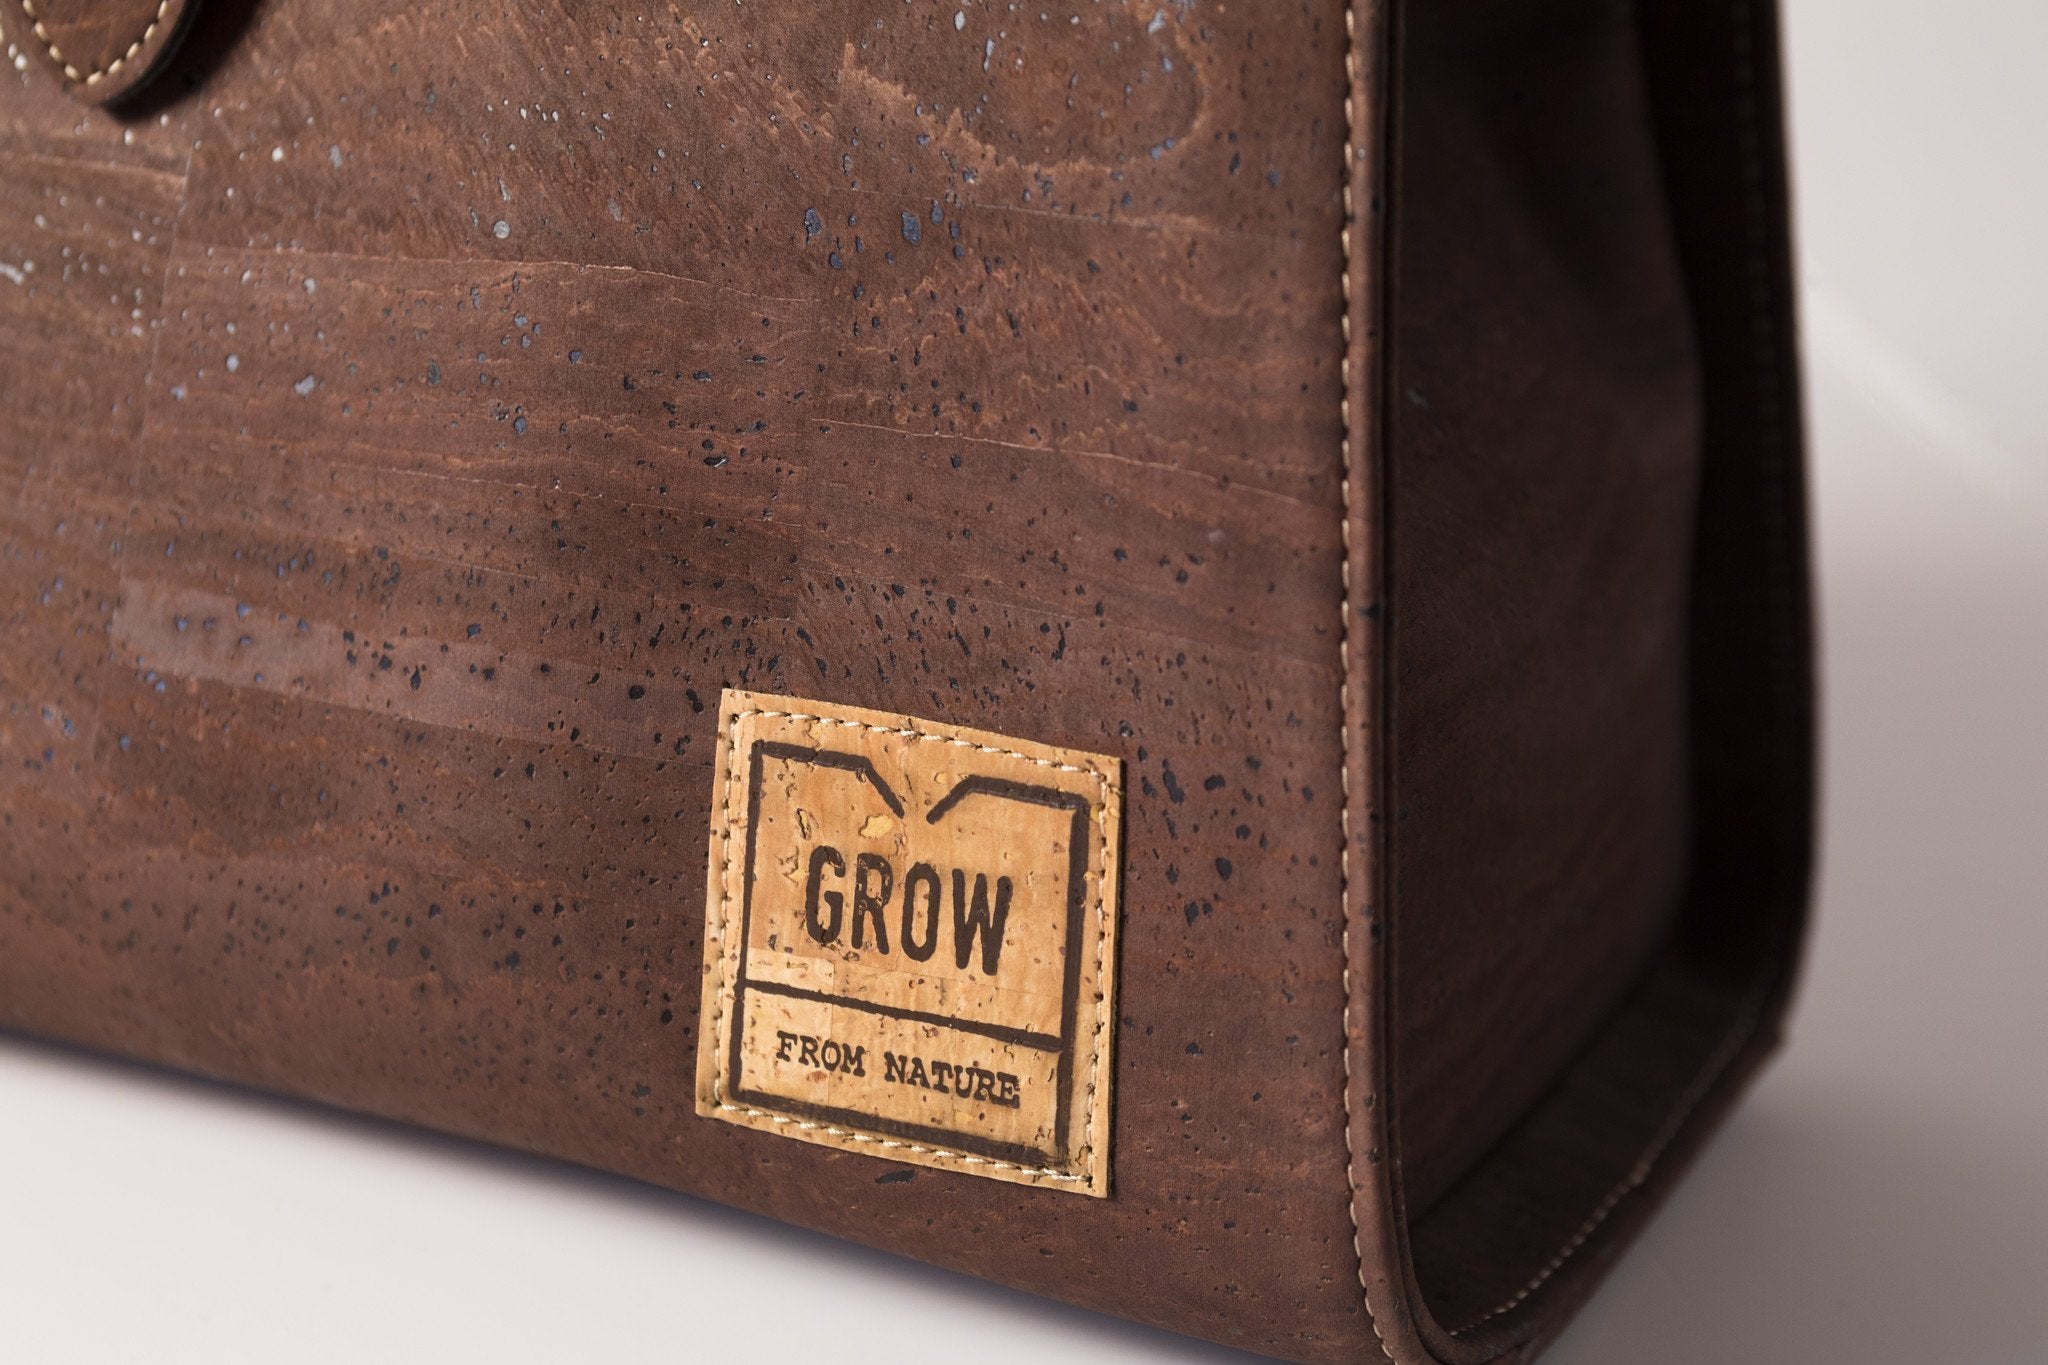 Suber Tote Bag - Grow From Nature